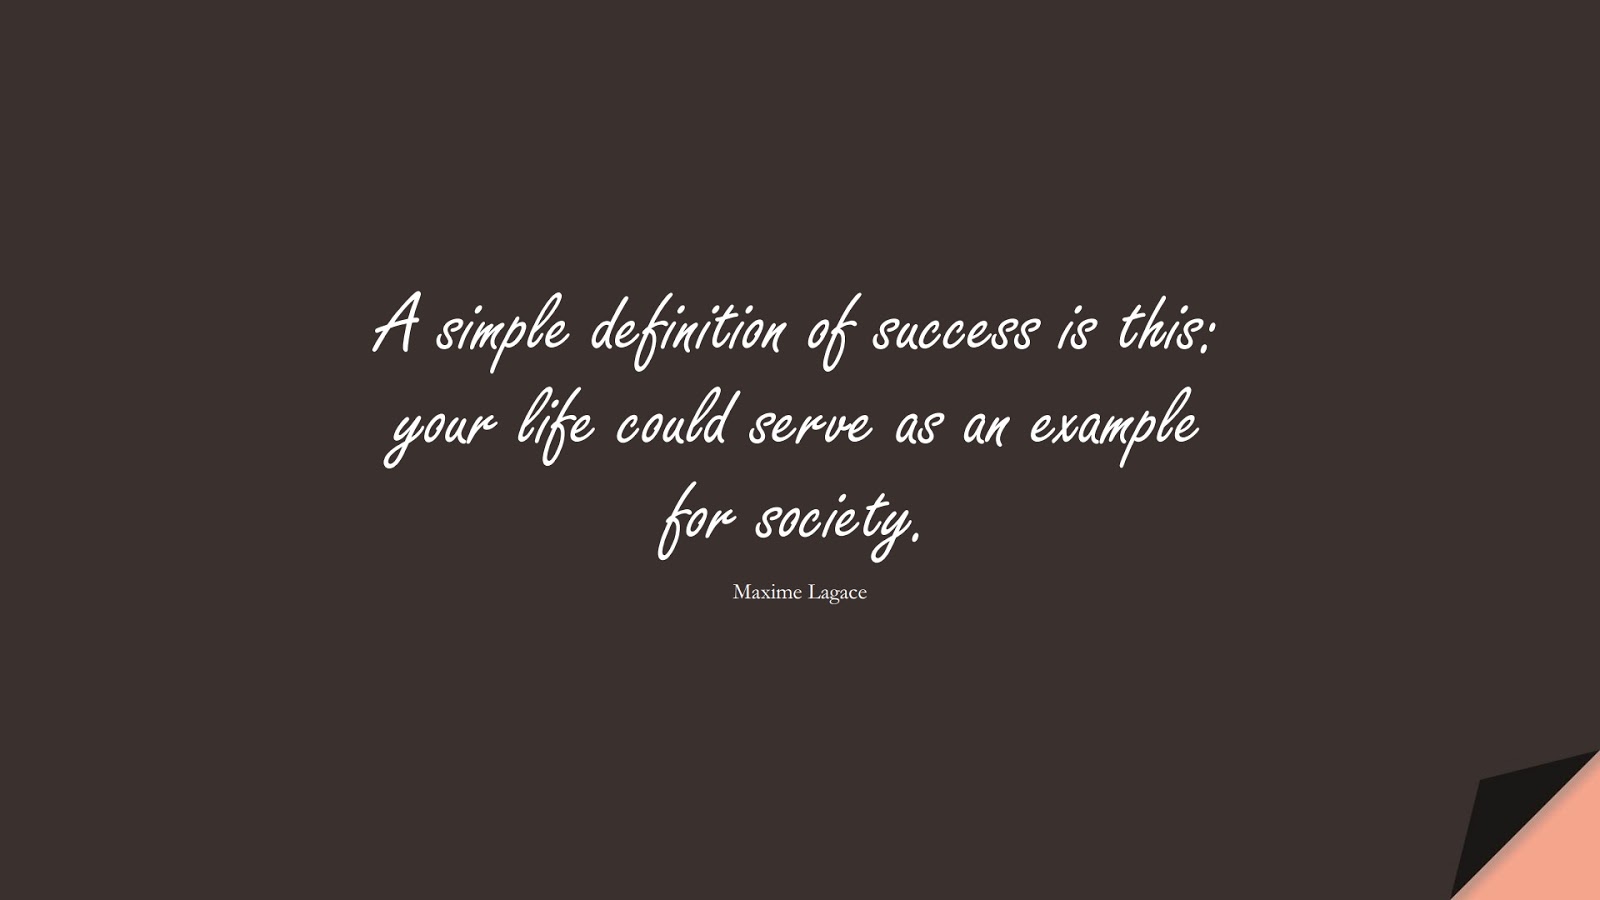 A simple definition of success is this: your life could serve as an example for society. (Maxime Lagace);  #LifeQuotes